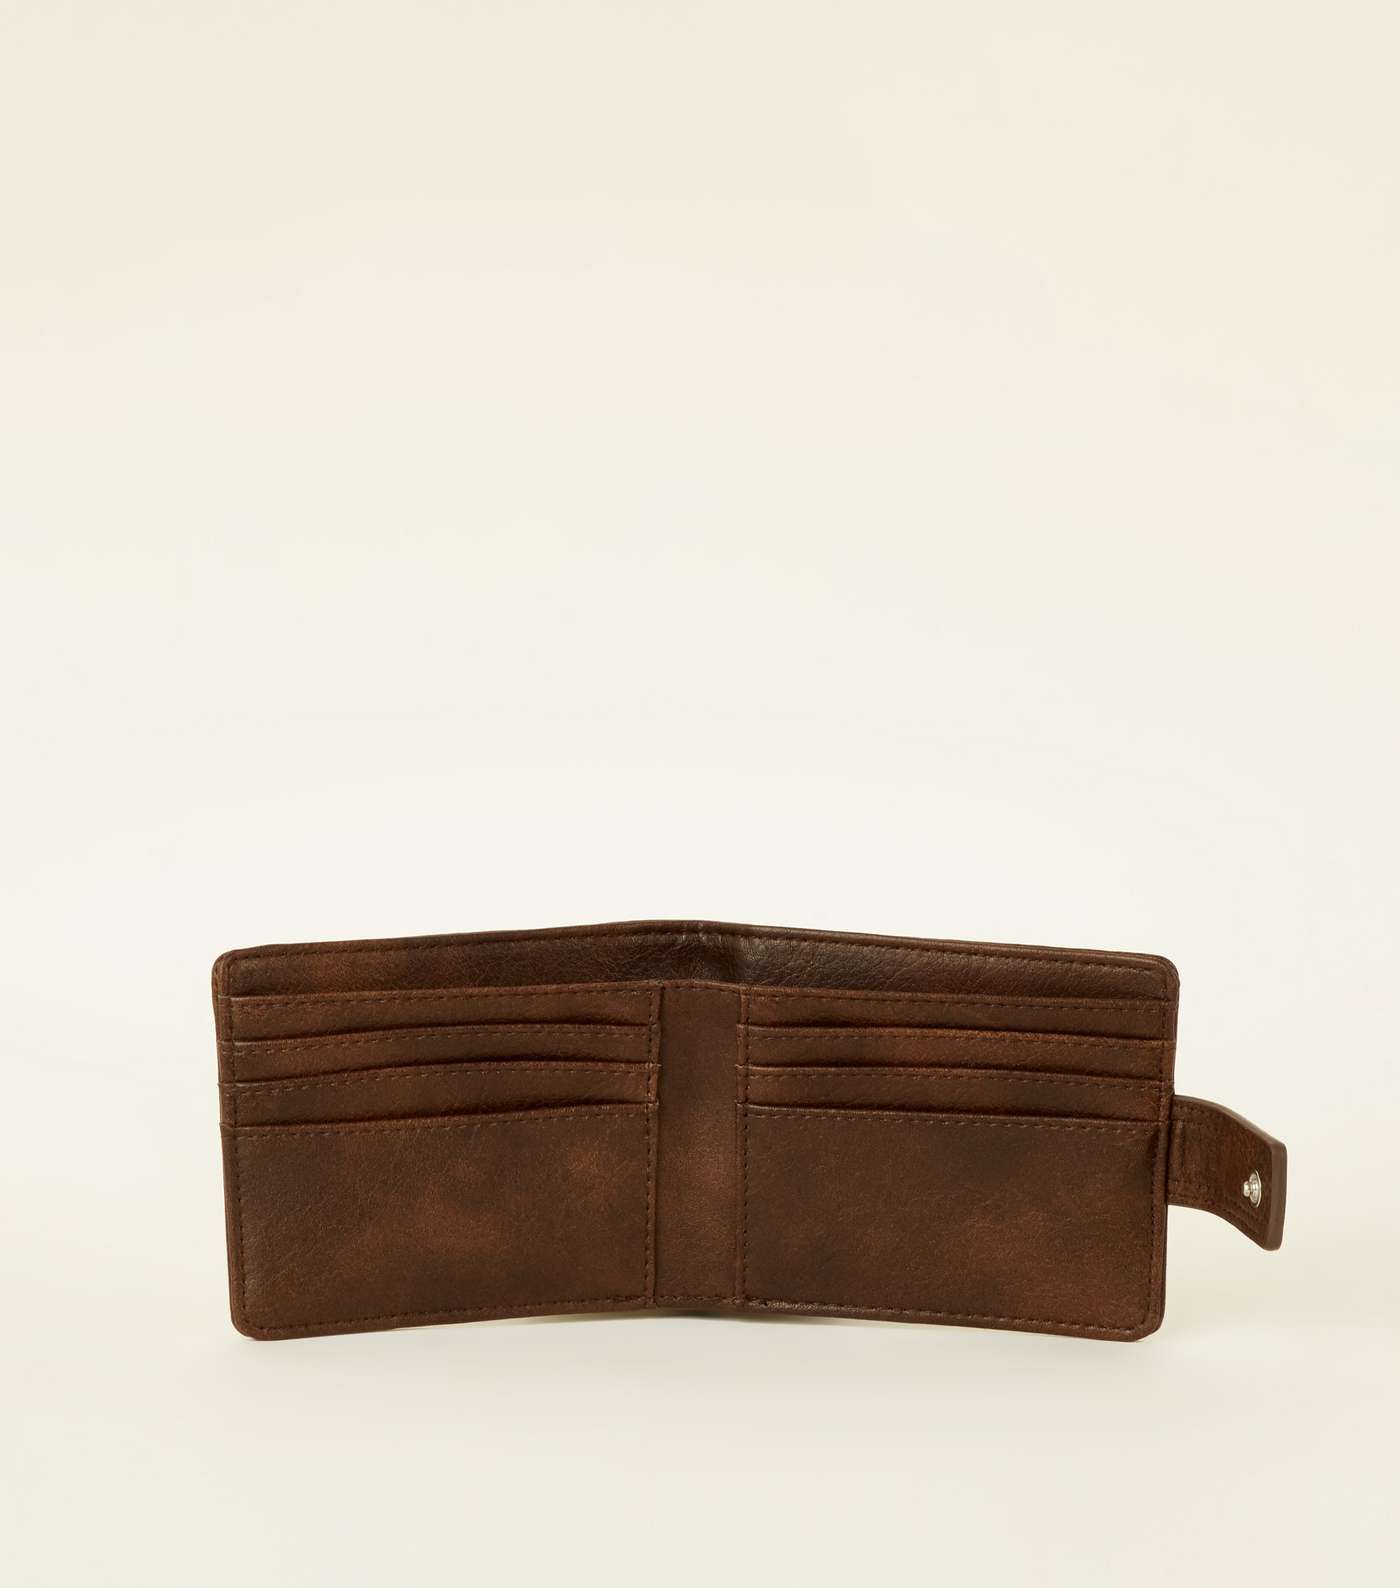 Tan Leather-Look Popper Button Wallet Image 2